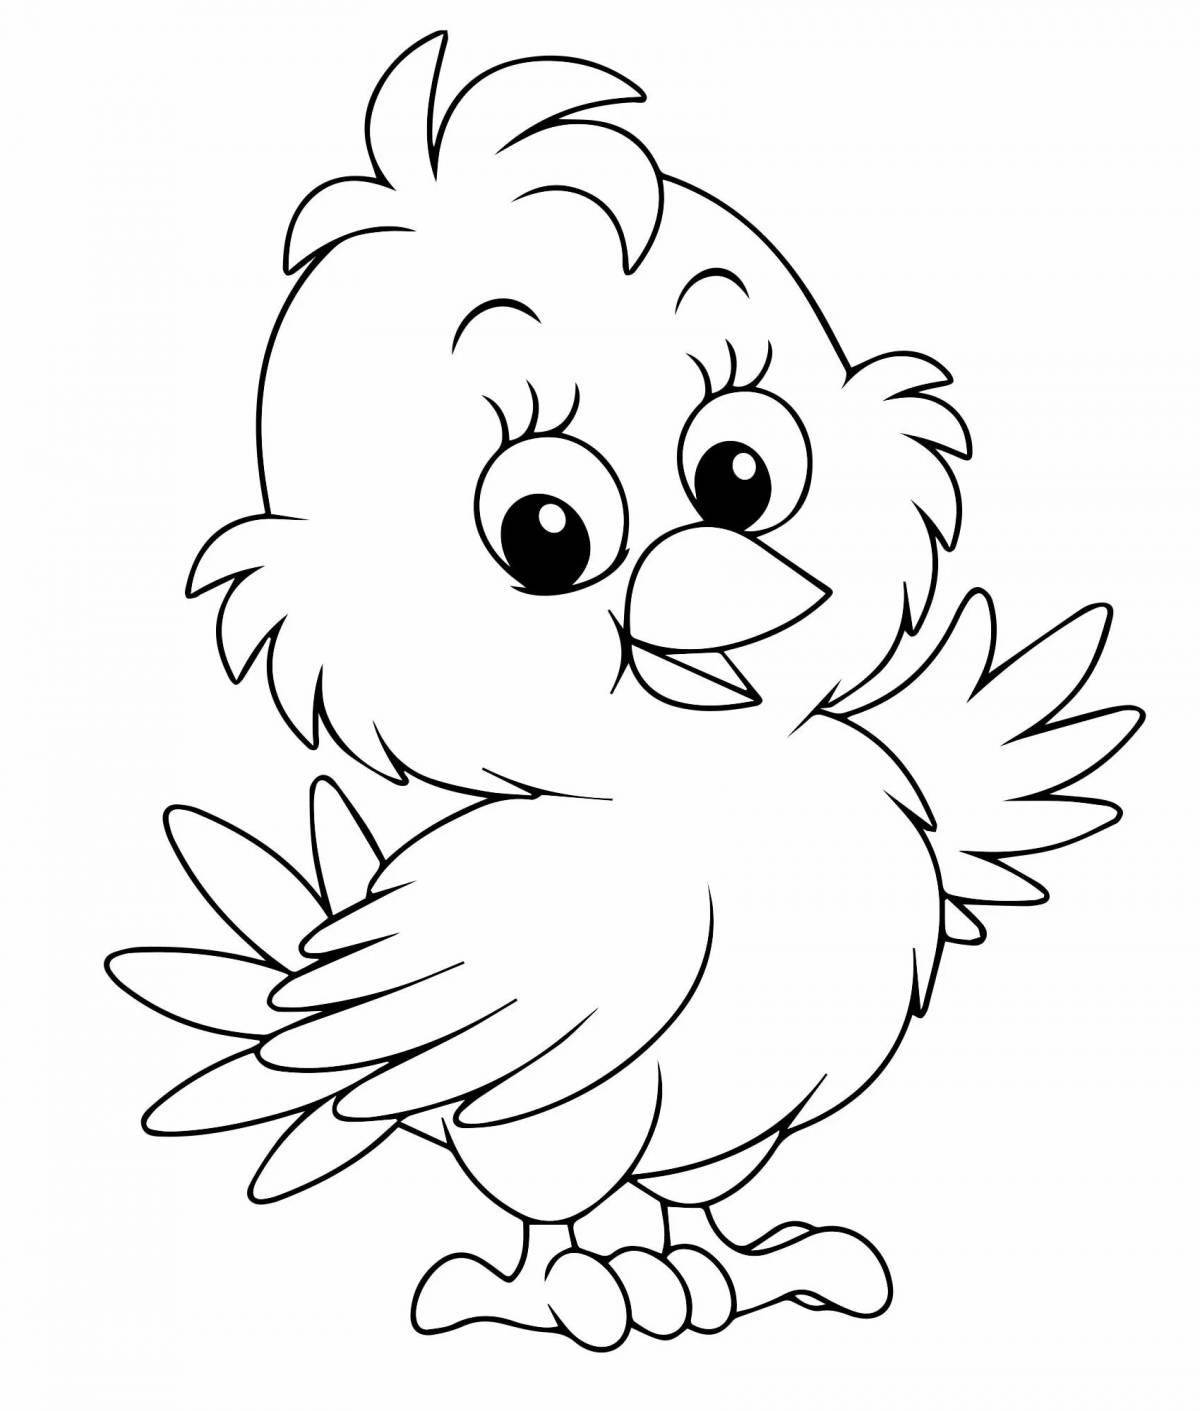 Sweet chick drawing for kids